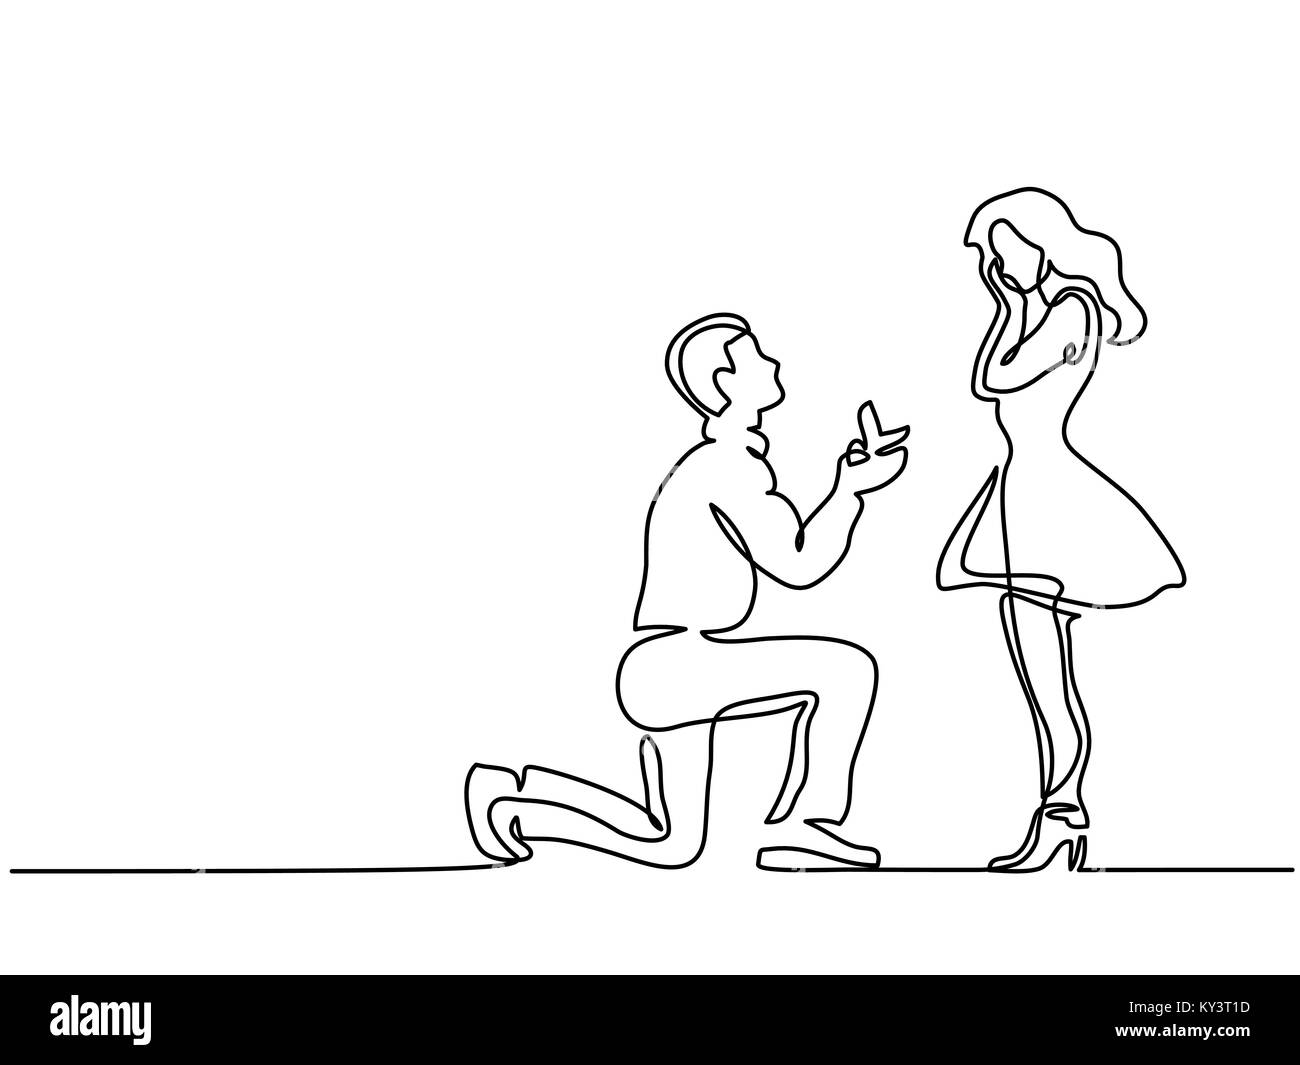 Man kneeling offering engagement ring to woman Stock Vector